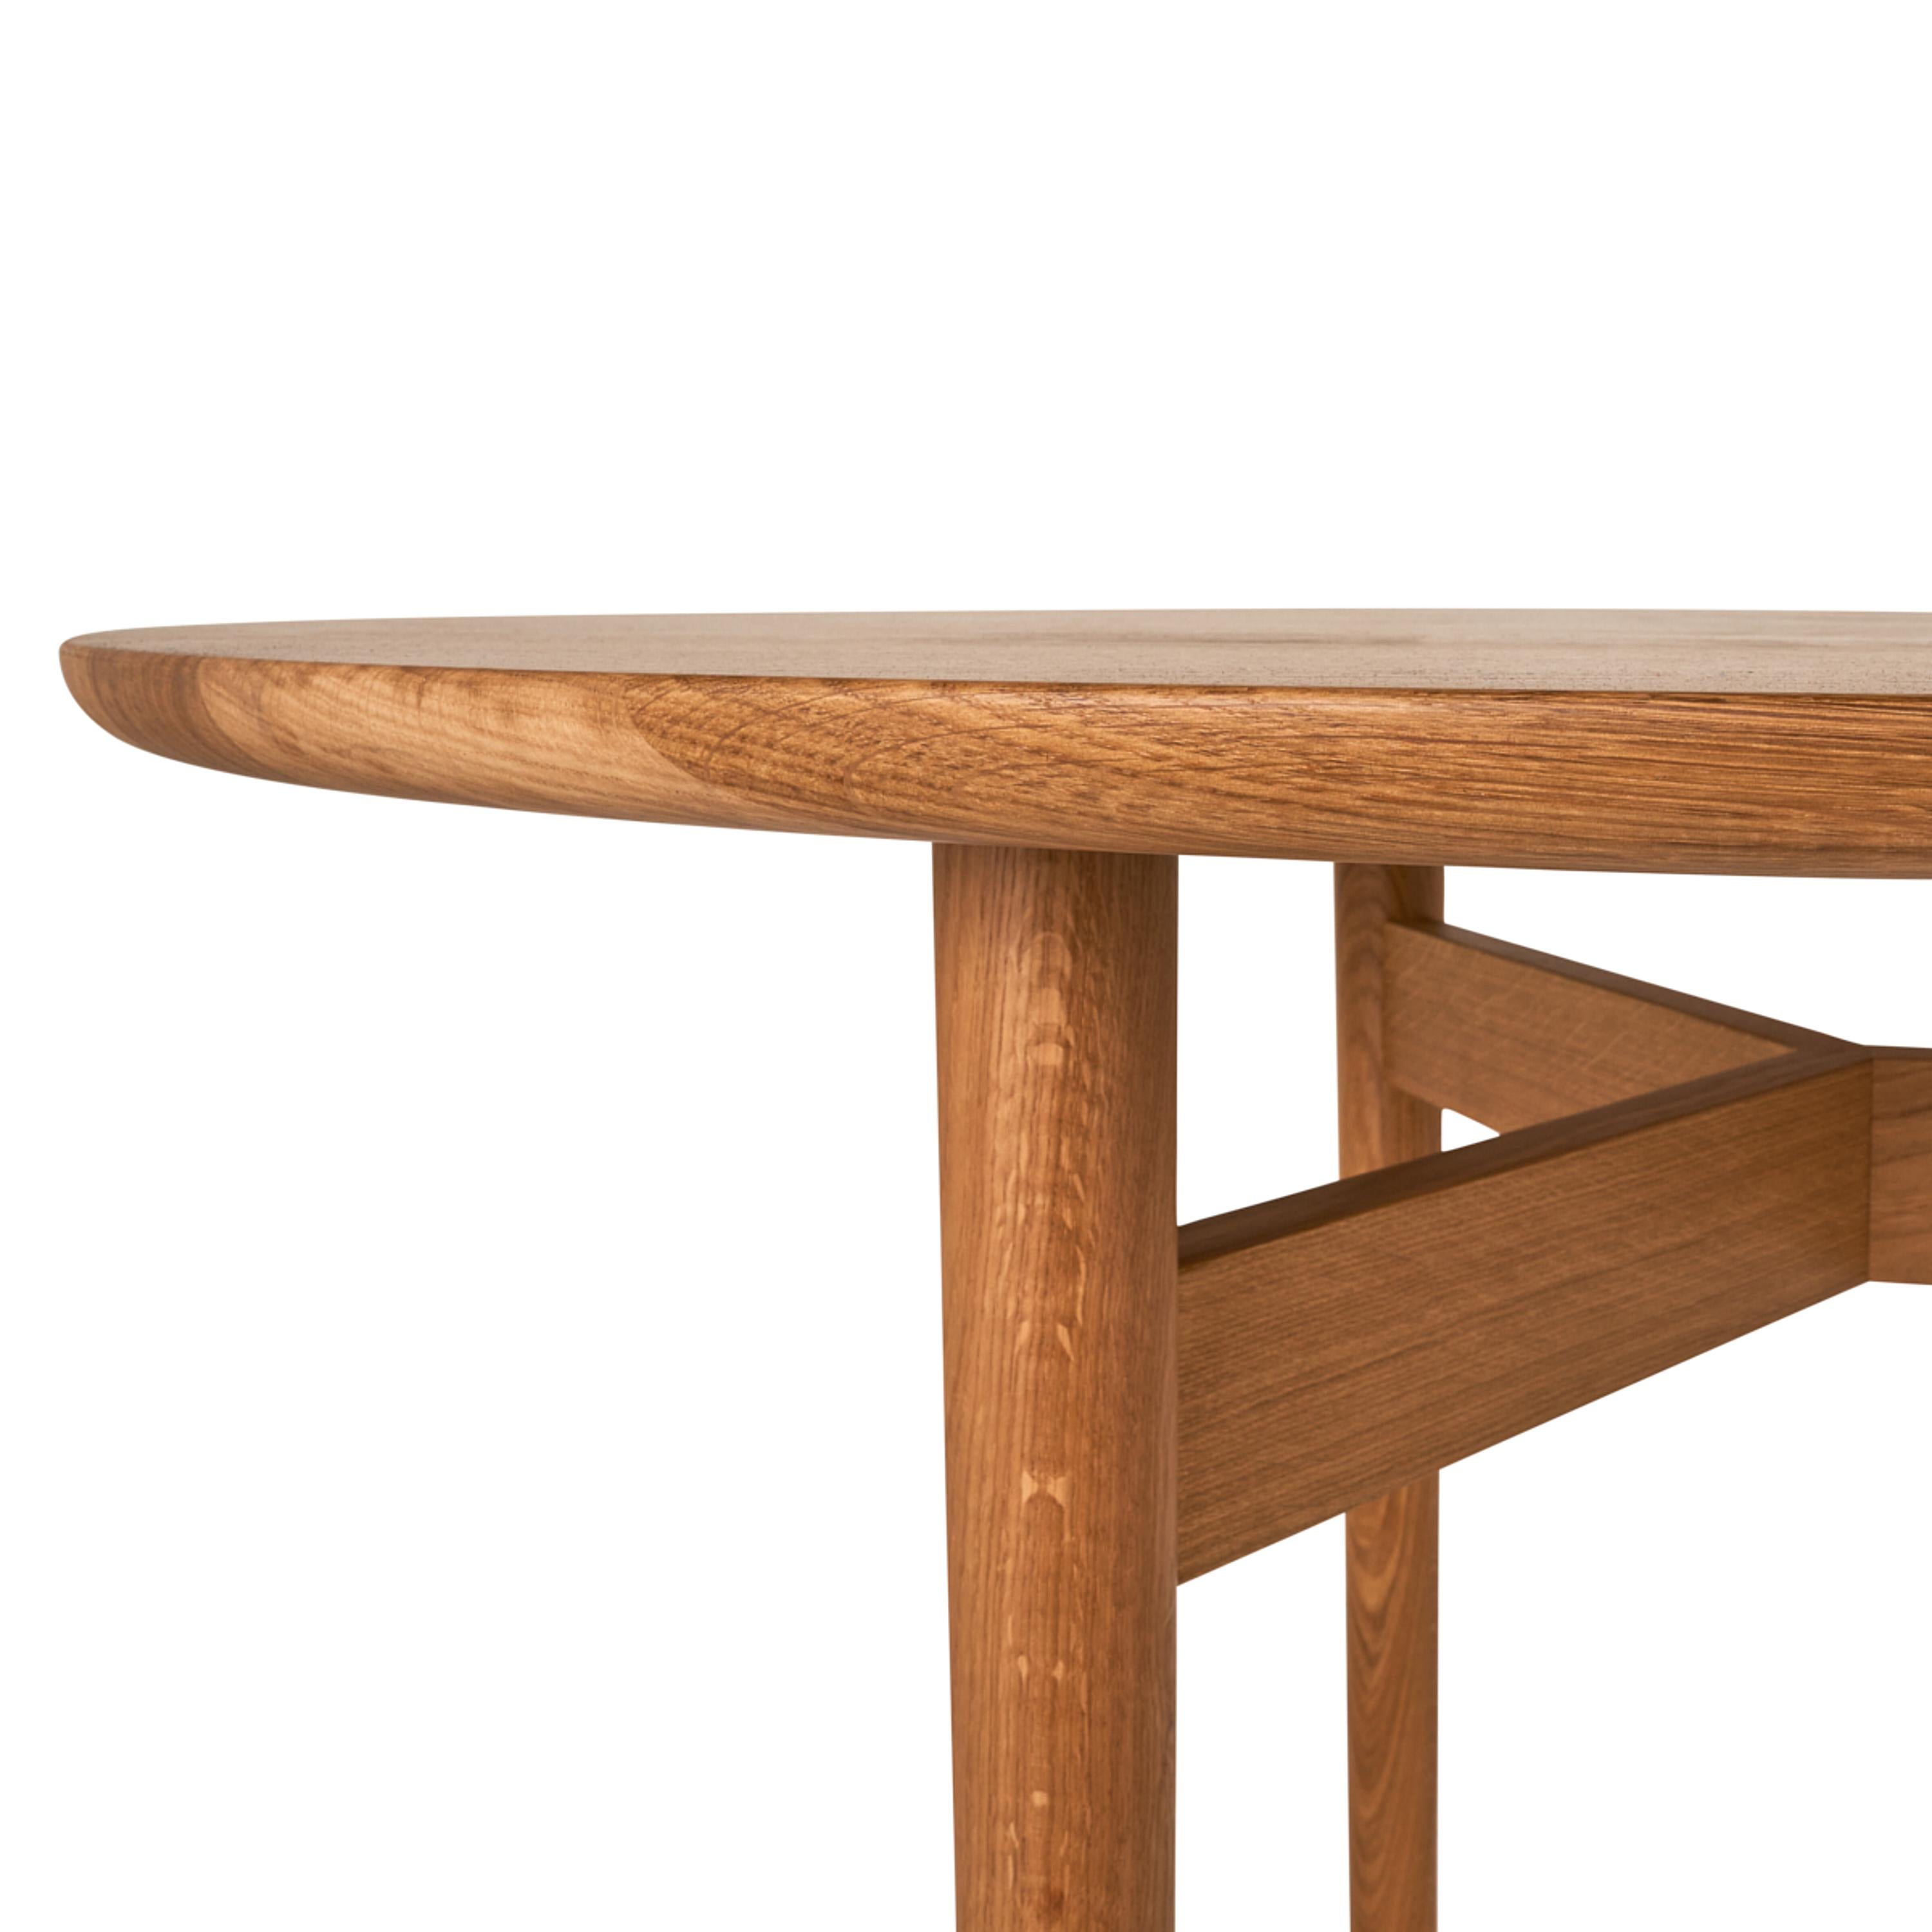 Elegantly beveled to give the solid oak construction a pure and light appearance, the Puffin Dining Table’s elliptical top is the perfect marriage of form and function. Designed in Denmark by Charlotte Høncke and meticulously handcrafted in Italy,